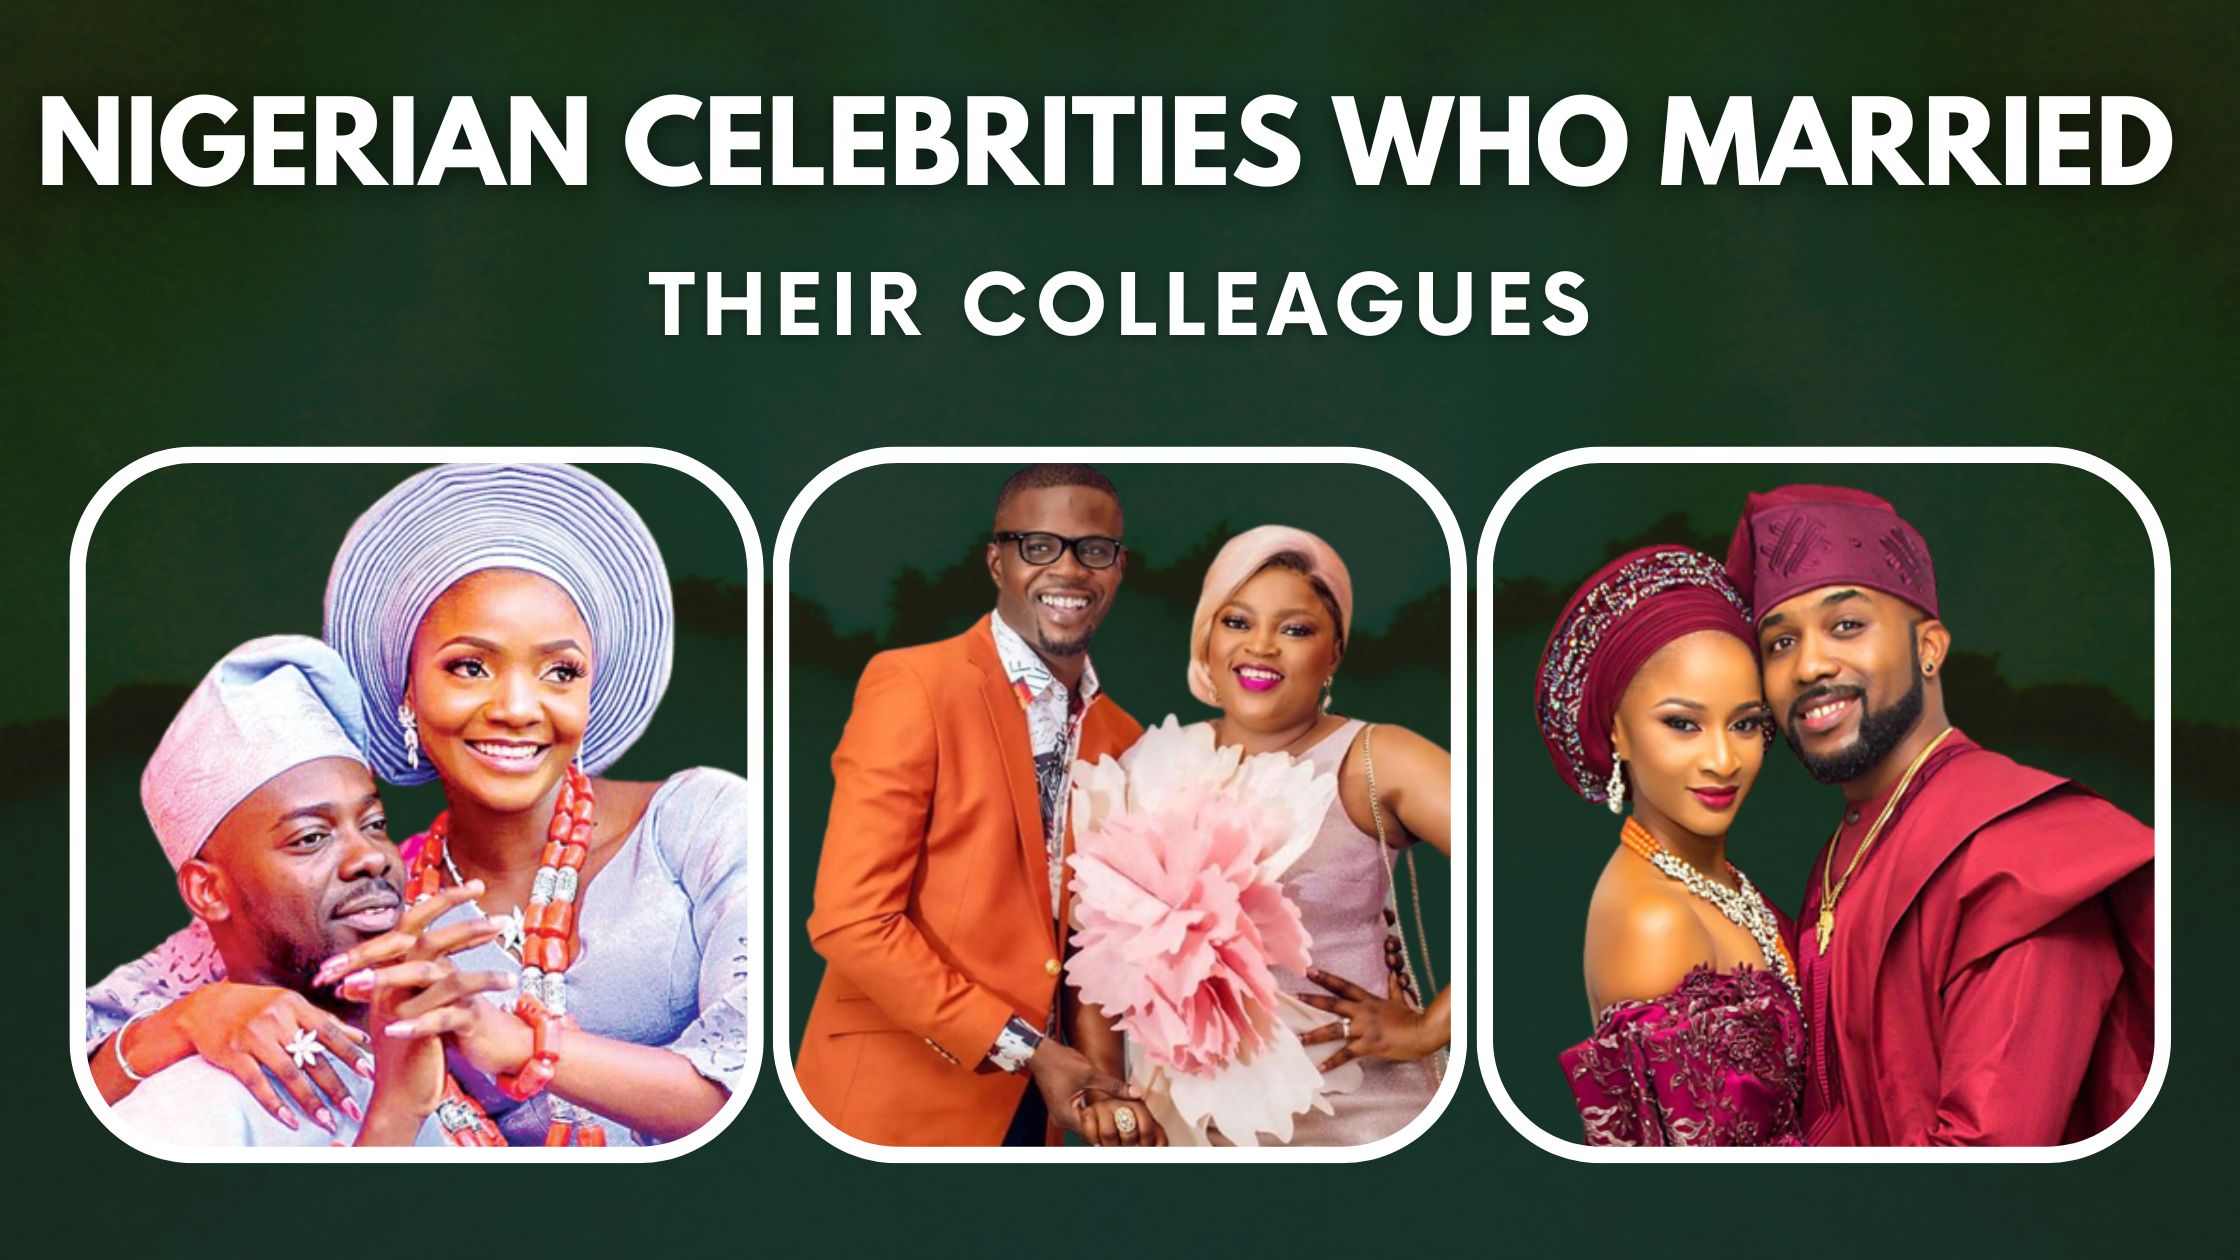 Top 10 Nigerian Celebrities Who Married Their Colleagues